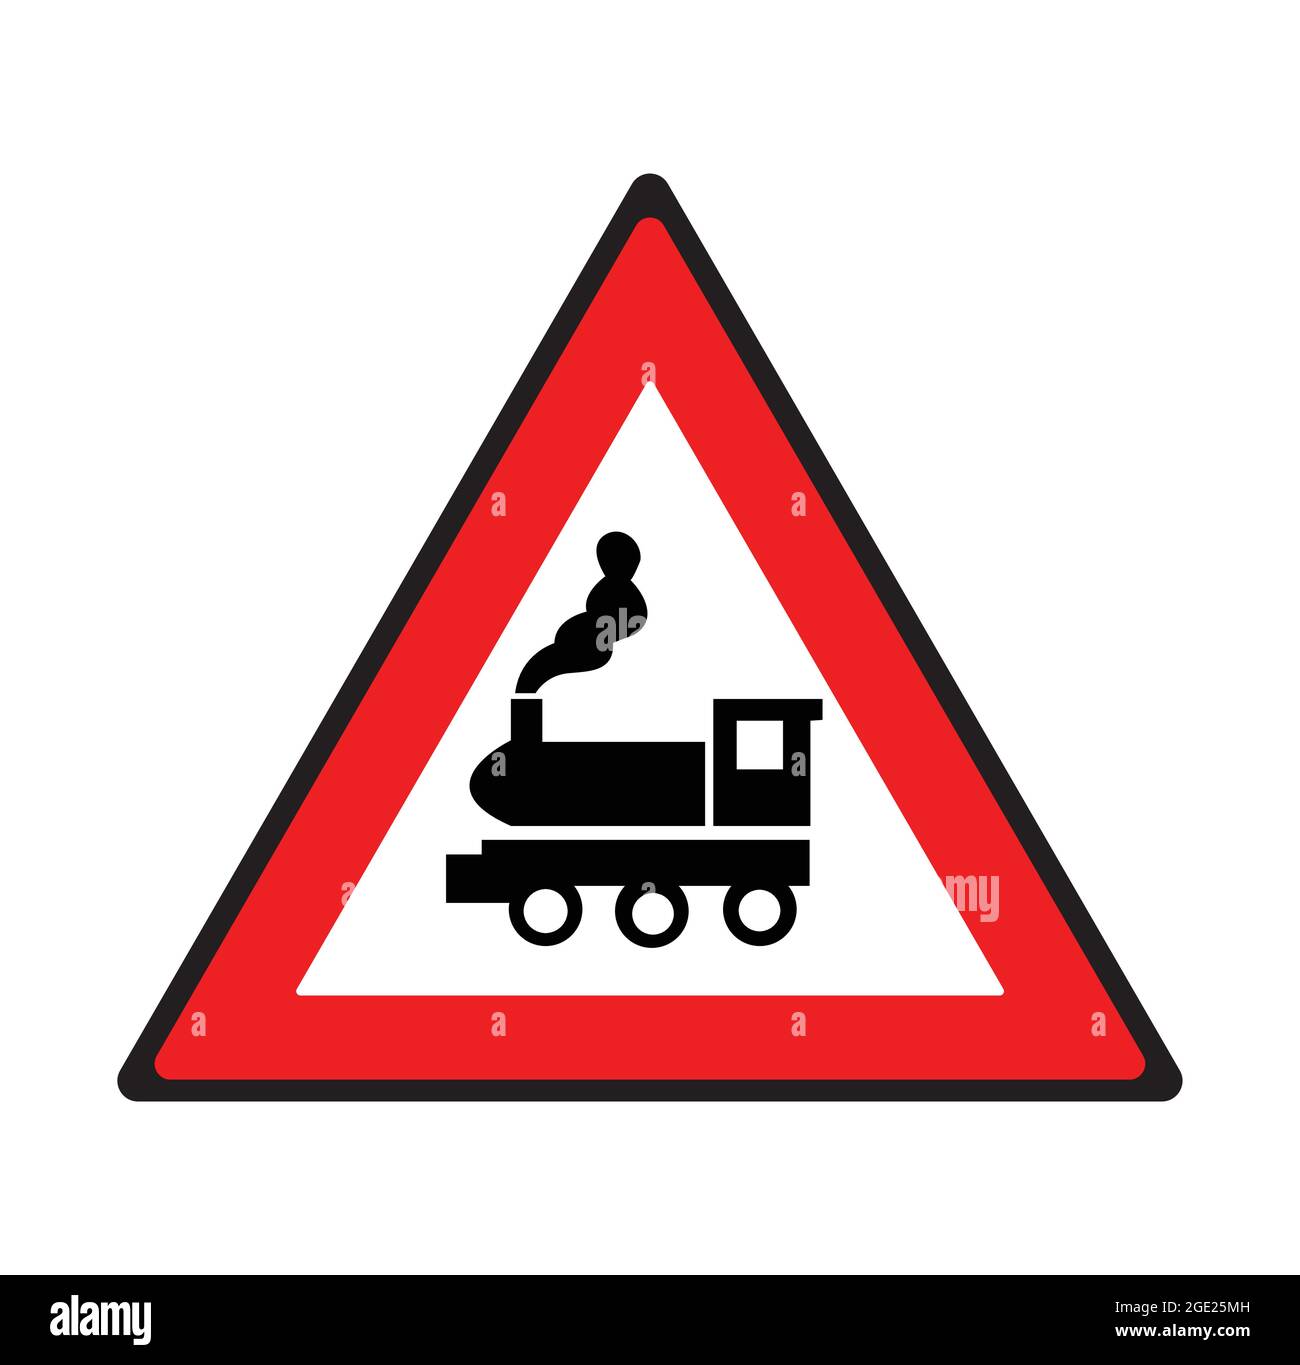 Unguarded railway crossing road sign. Safety symbol. Stock Vector